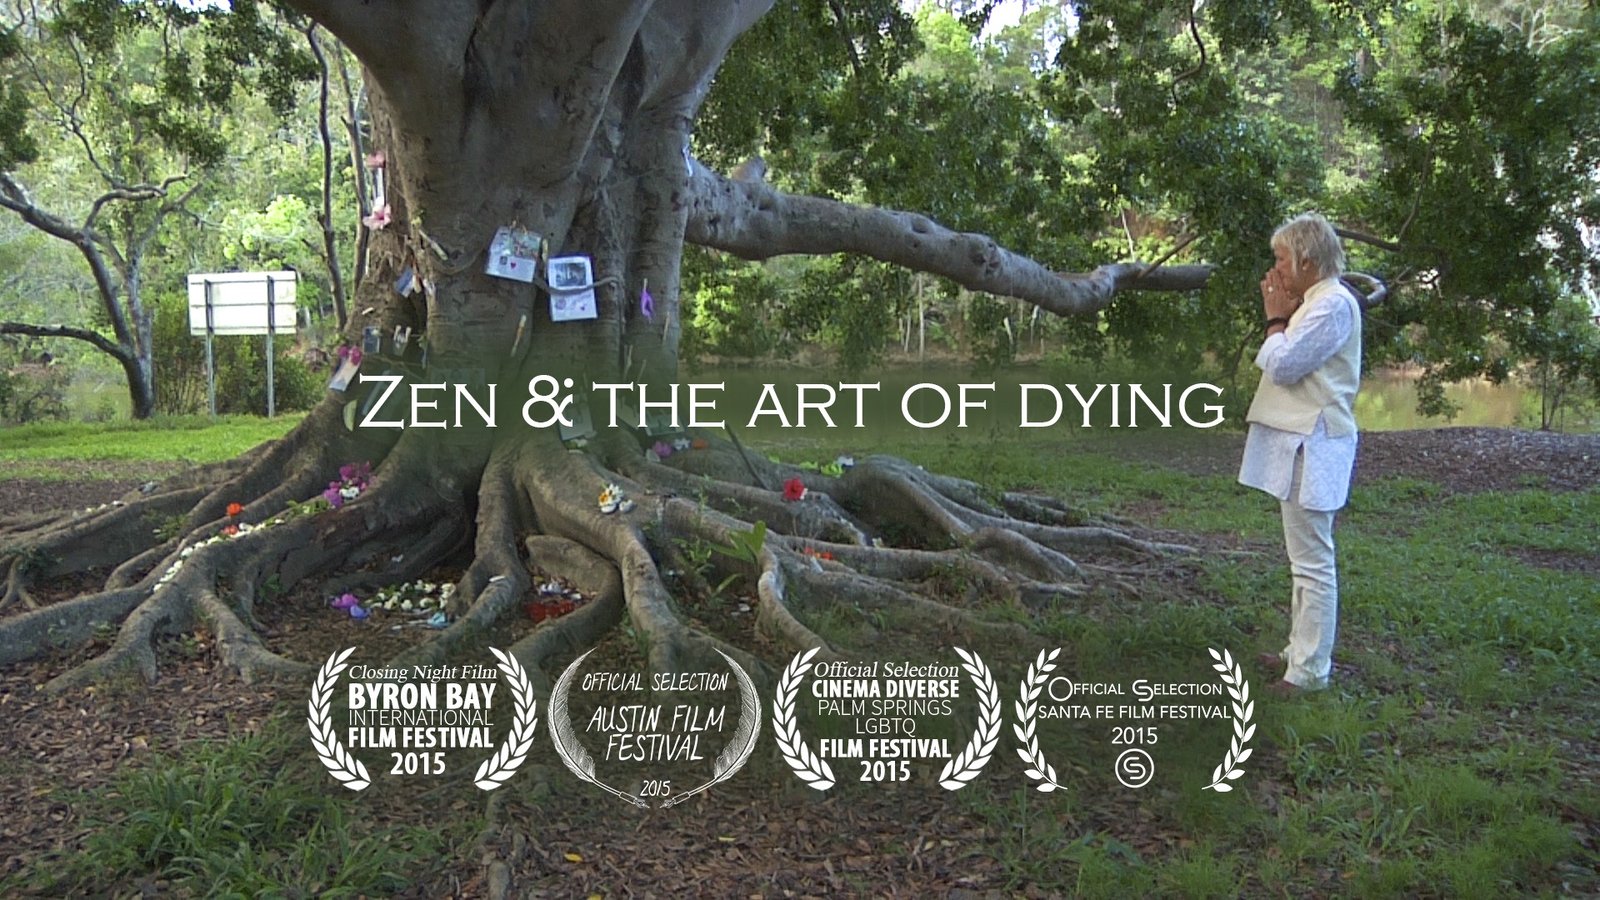 Zen & the Art of Dying - Let's Do Death Differently